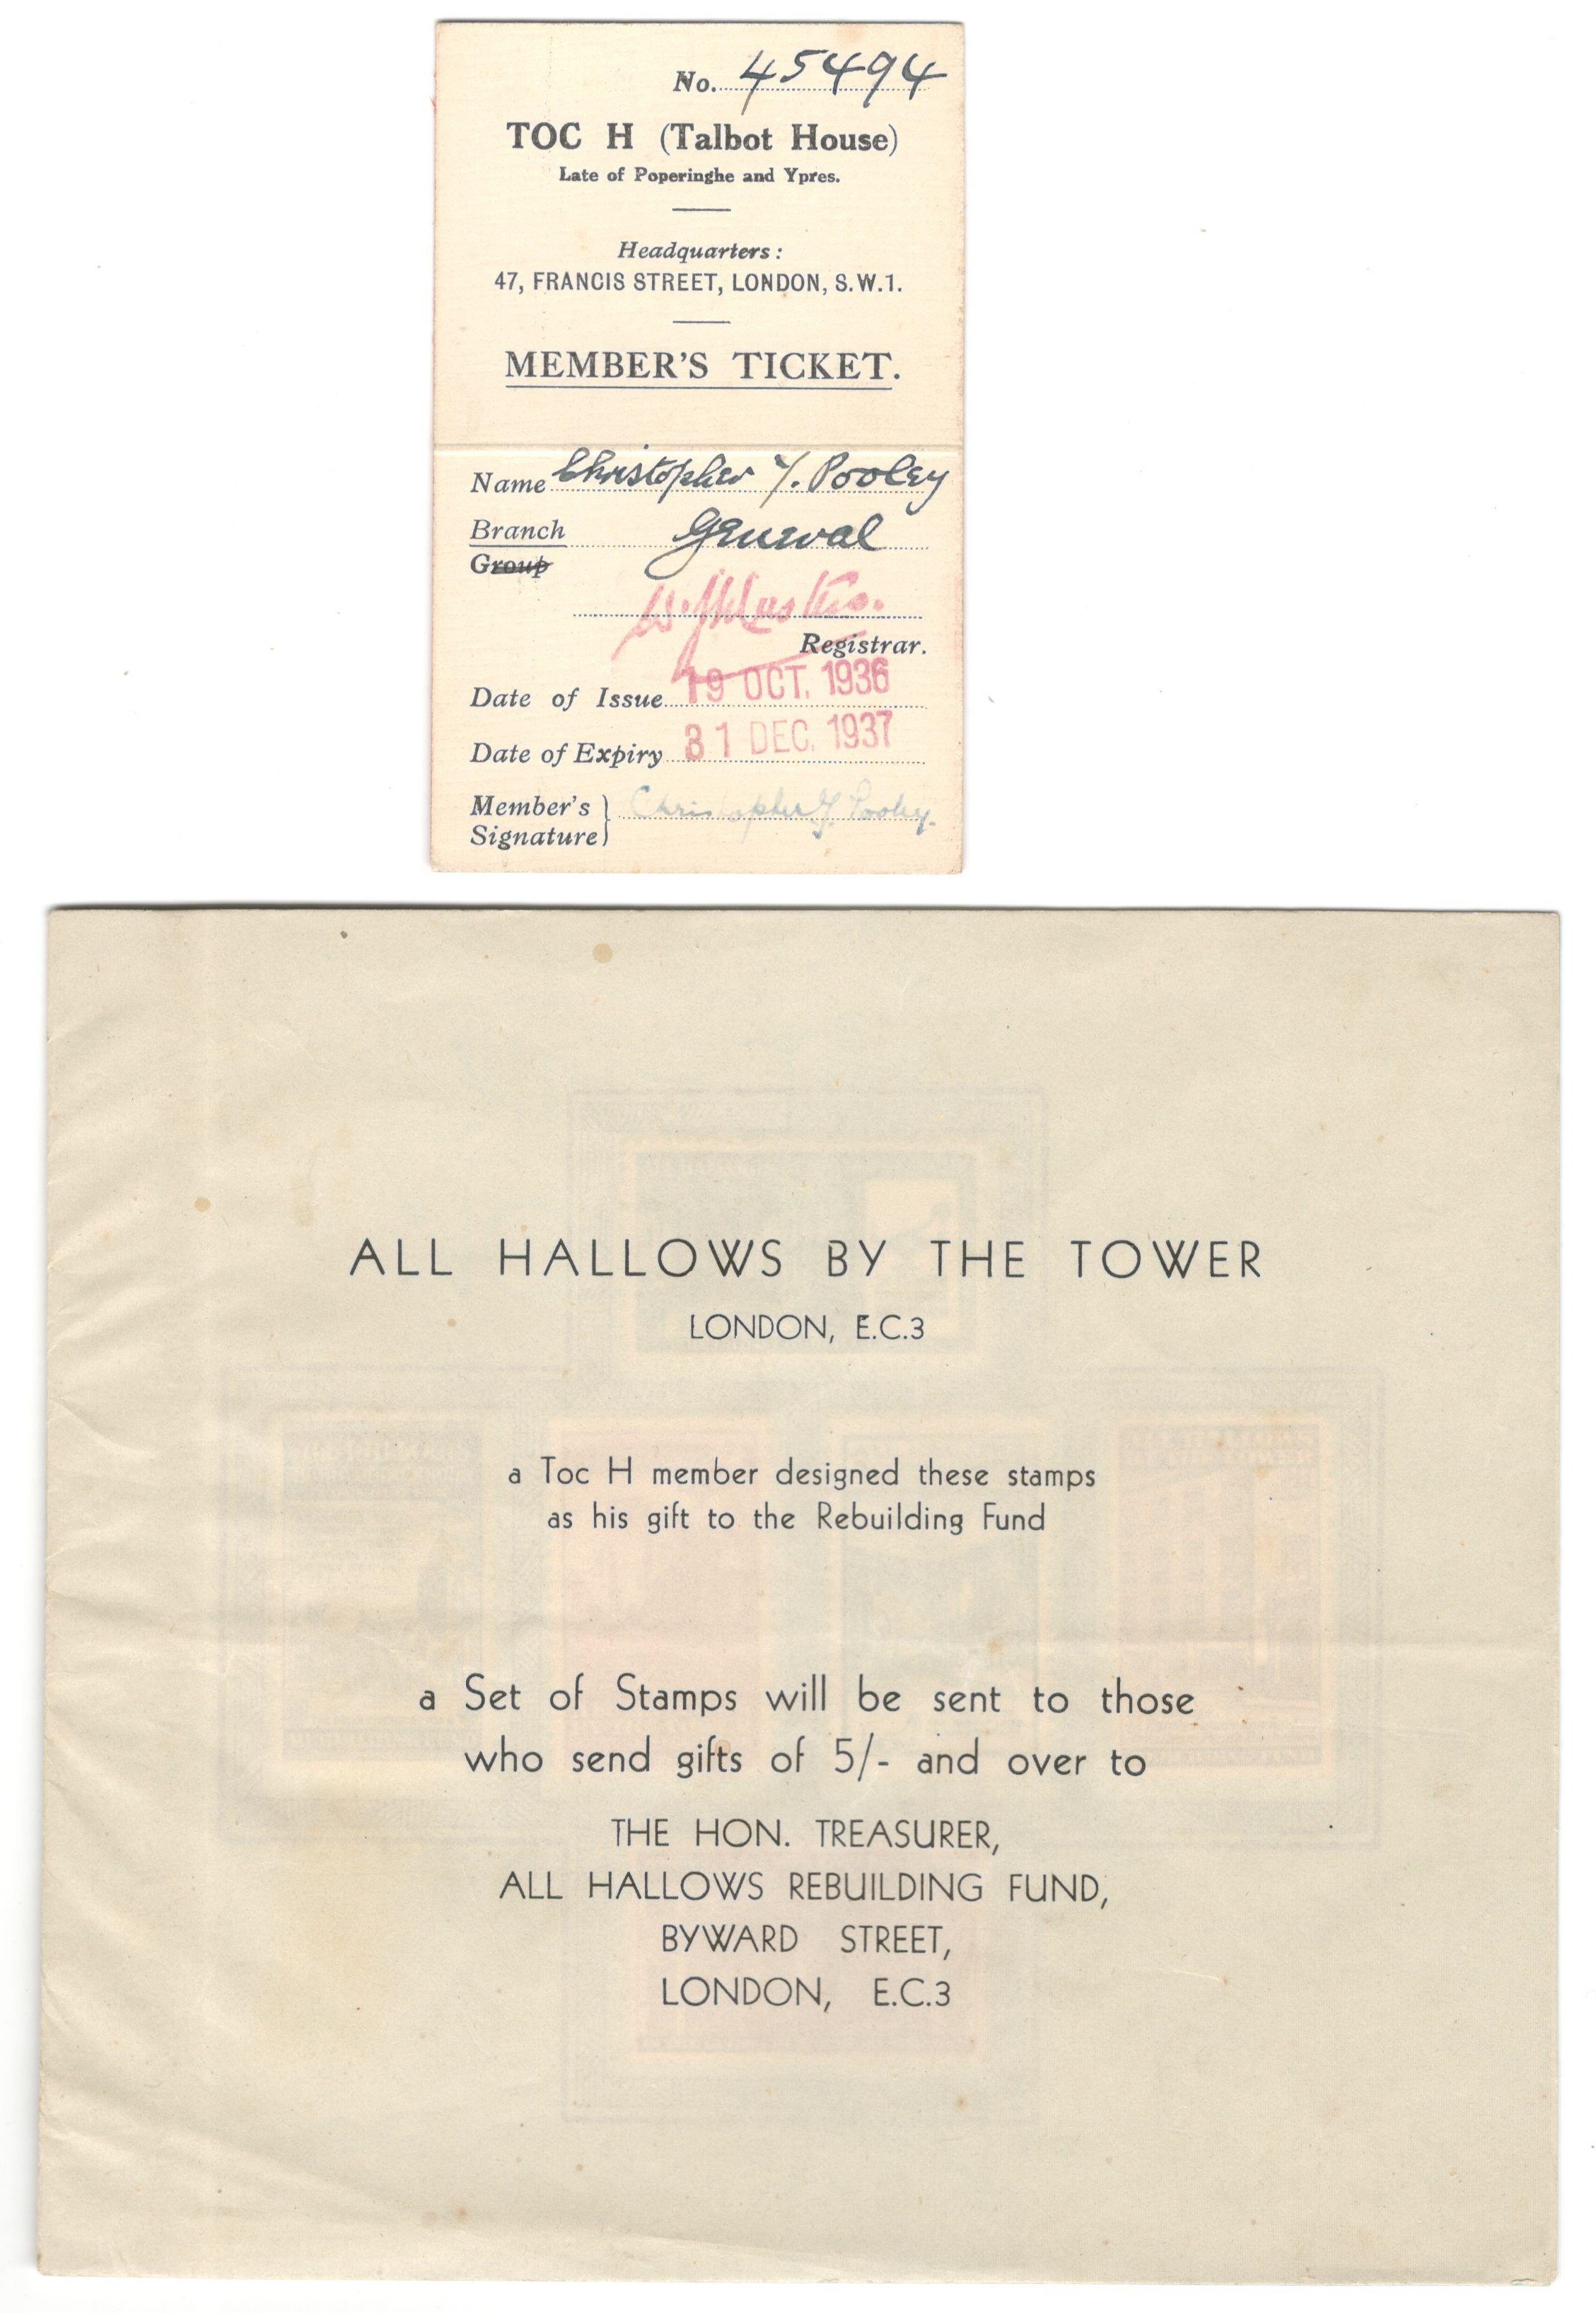 TALBOT HOUSE MEMBERS TICKET & SPECIAL SET OF STAMPS - Image 3 of 3